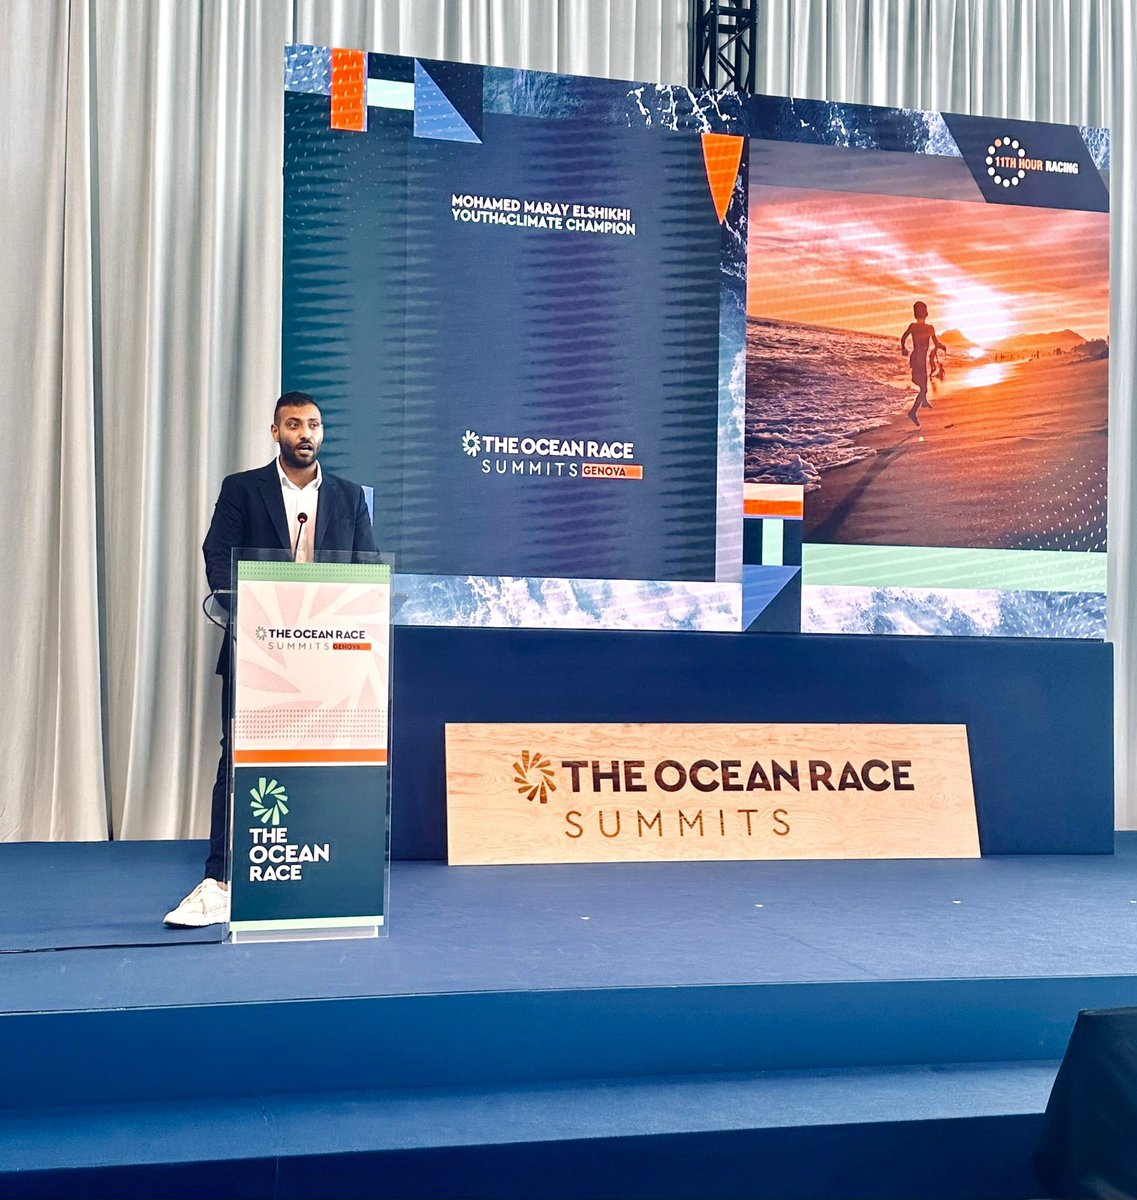 On June 27th I had the honour to deliver a call for action on behalf of the #youth4climate community at the Ocean Race Summit. 

I’m grateful to @undp_romecentre and the #Youth4Climate for this opportunity, together for a Universal Declaration of Ocean Rights. 

#theoceanrace